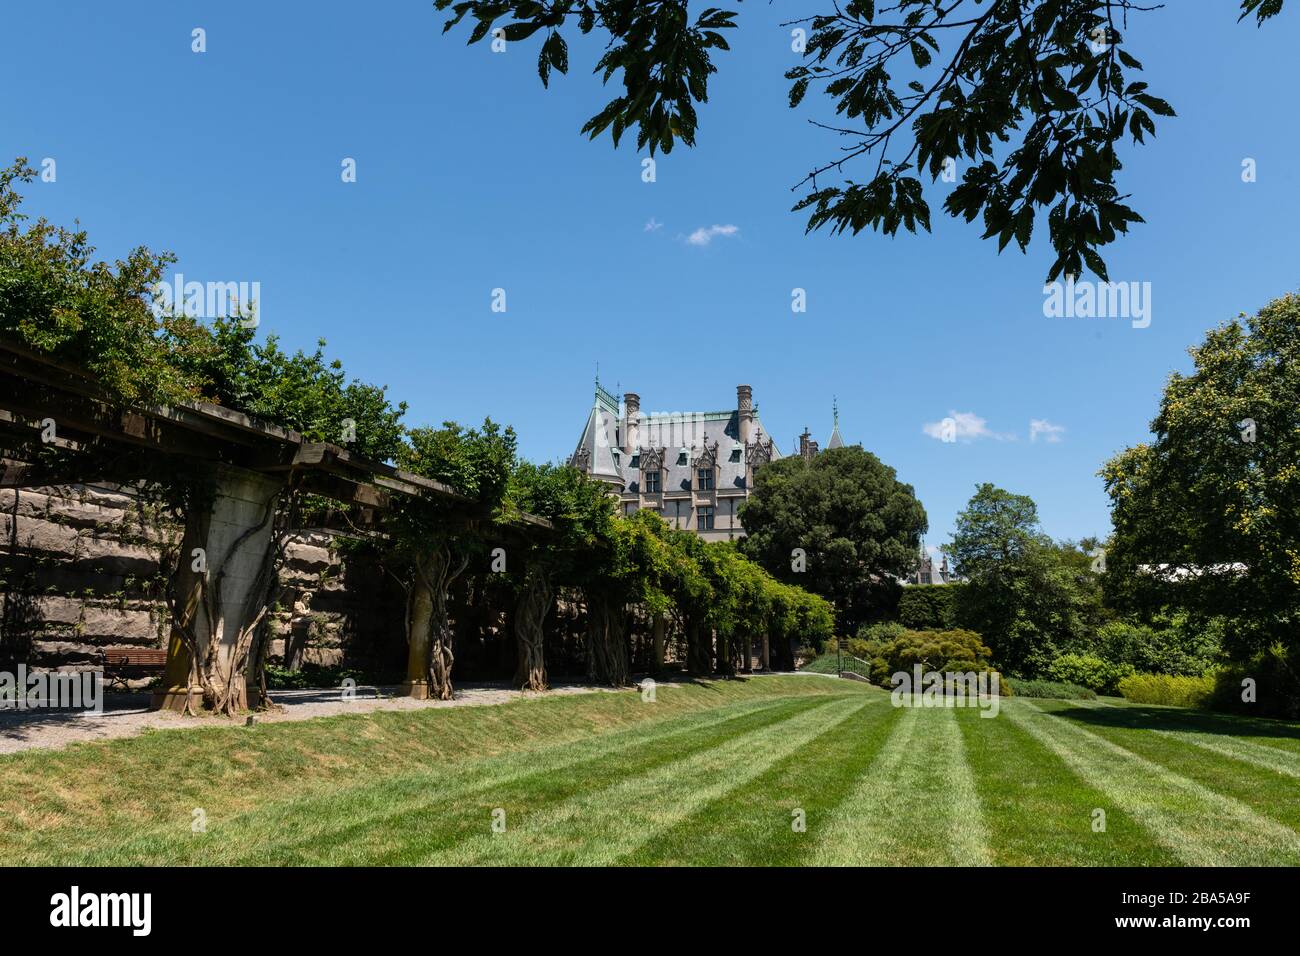 Asheville, North Carolina - July 24, 2019 - Sculptural and architectural details on the façade of the Biltmore Estate. Stock Photo